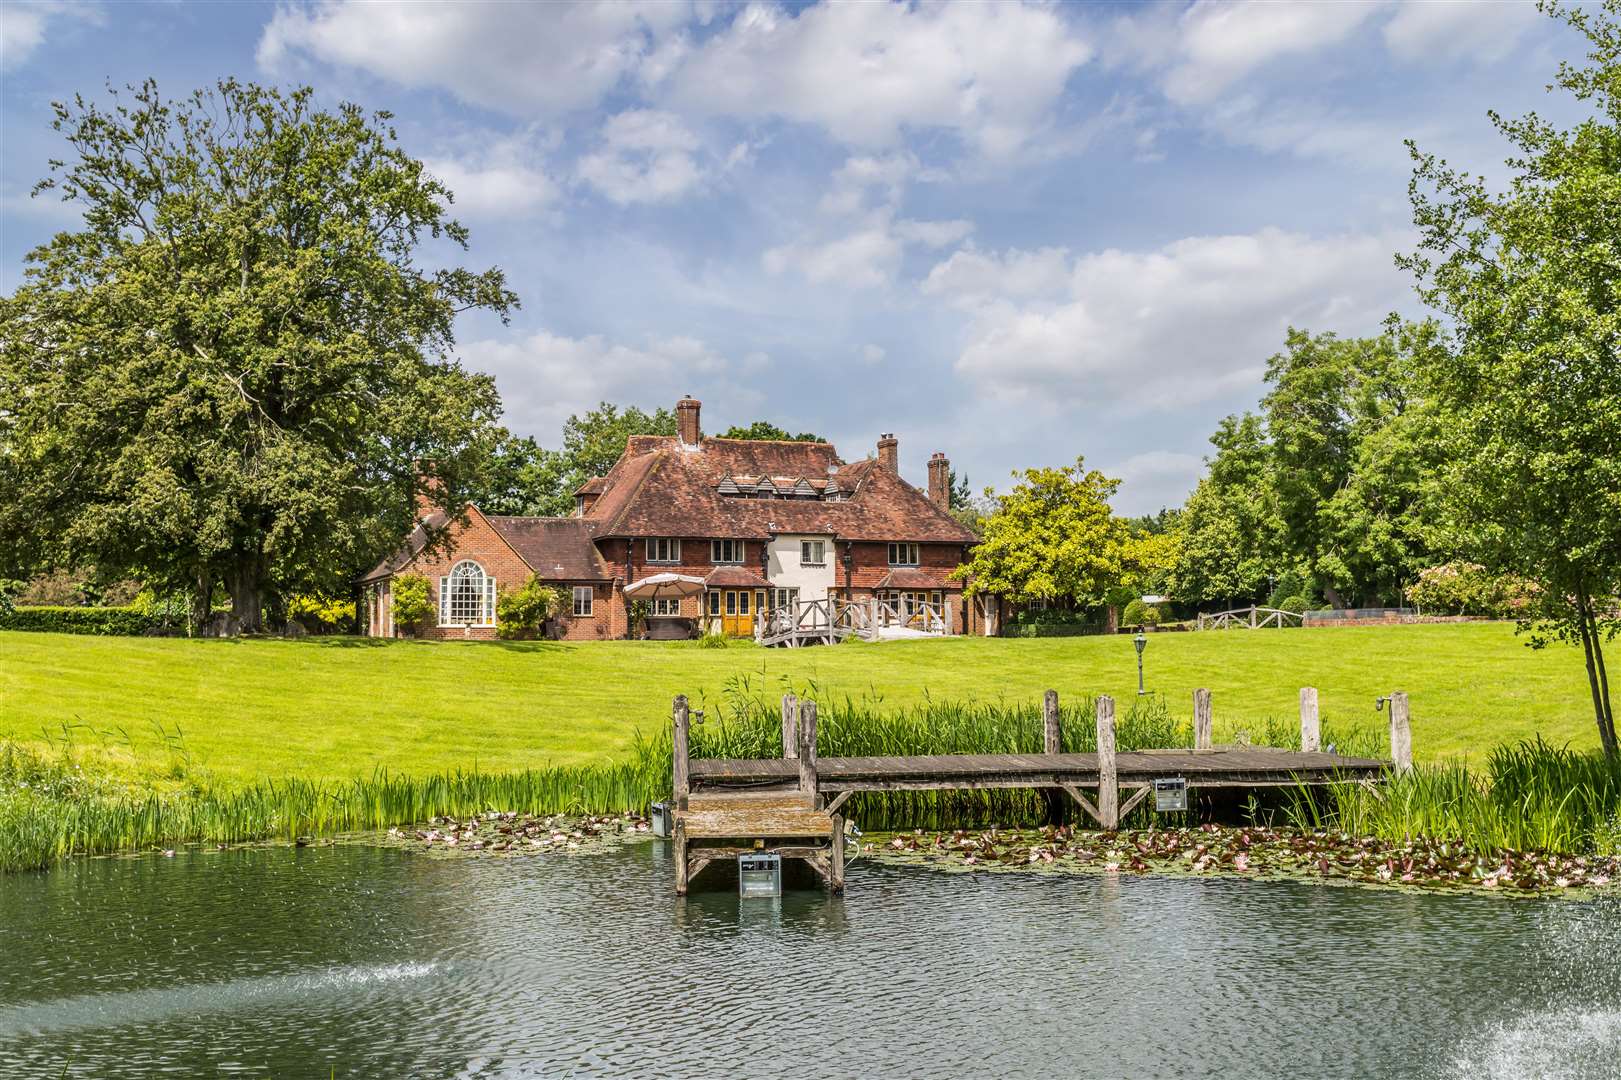 The Moat also has grounds, gardens and outbuildings Picture: Hamptons